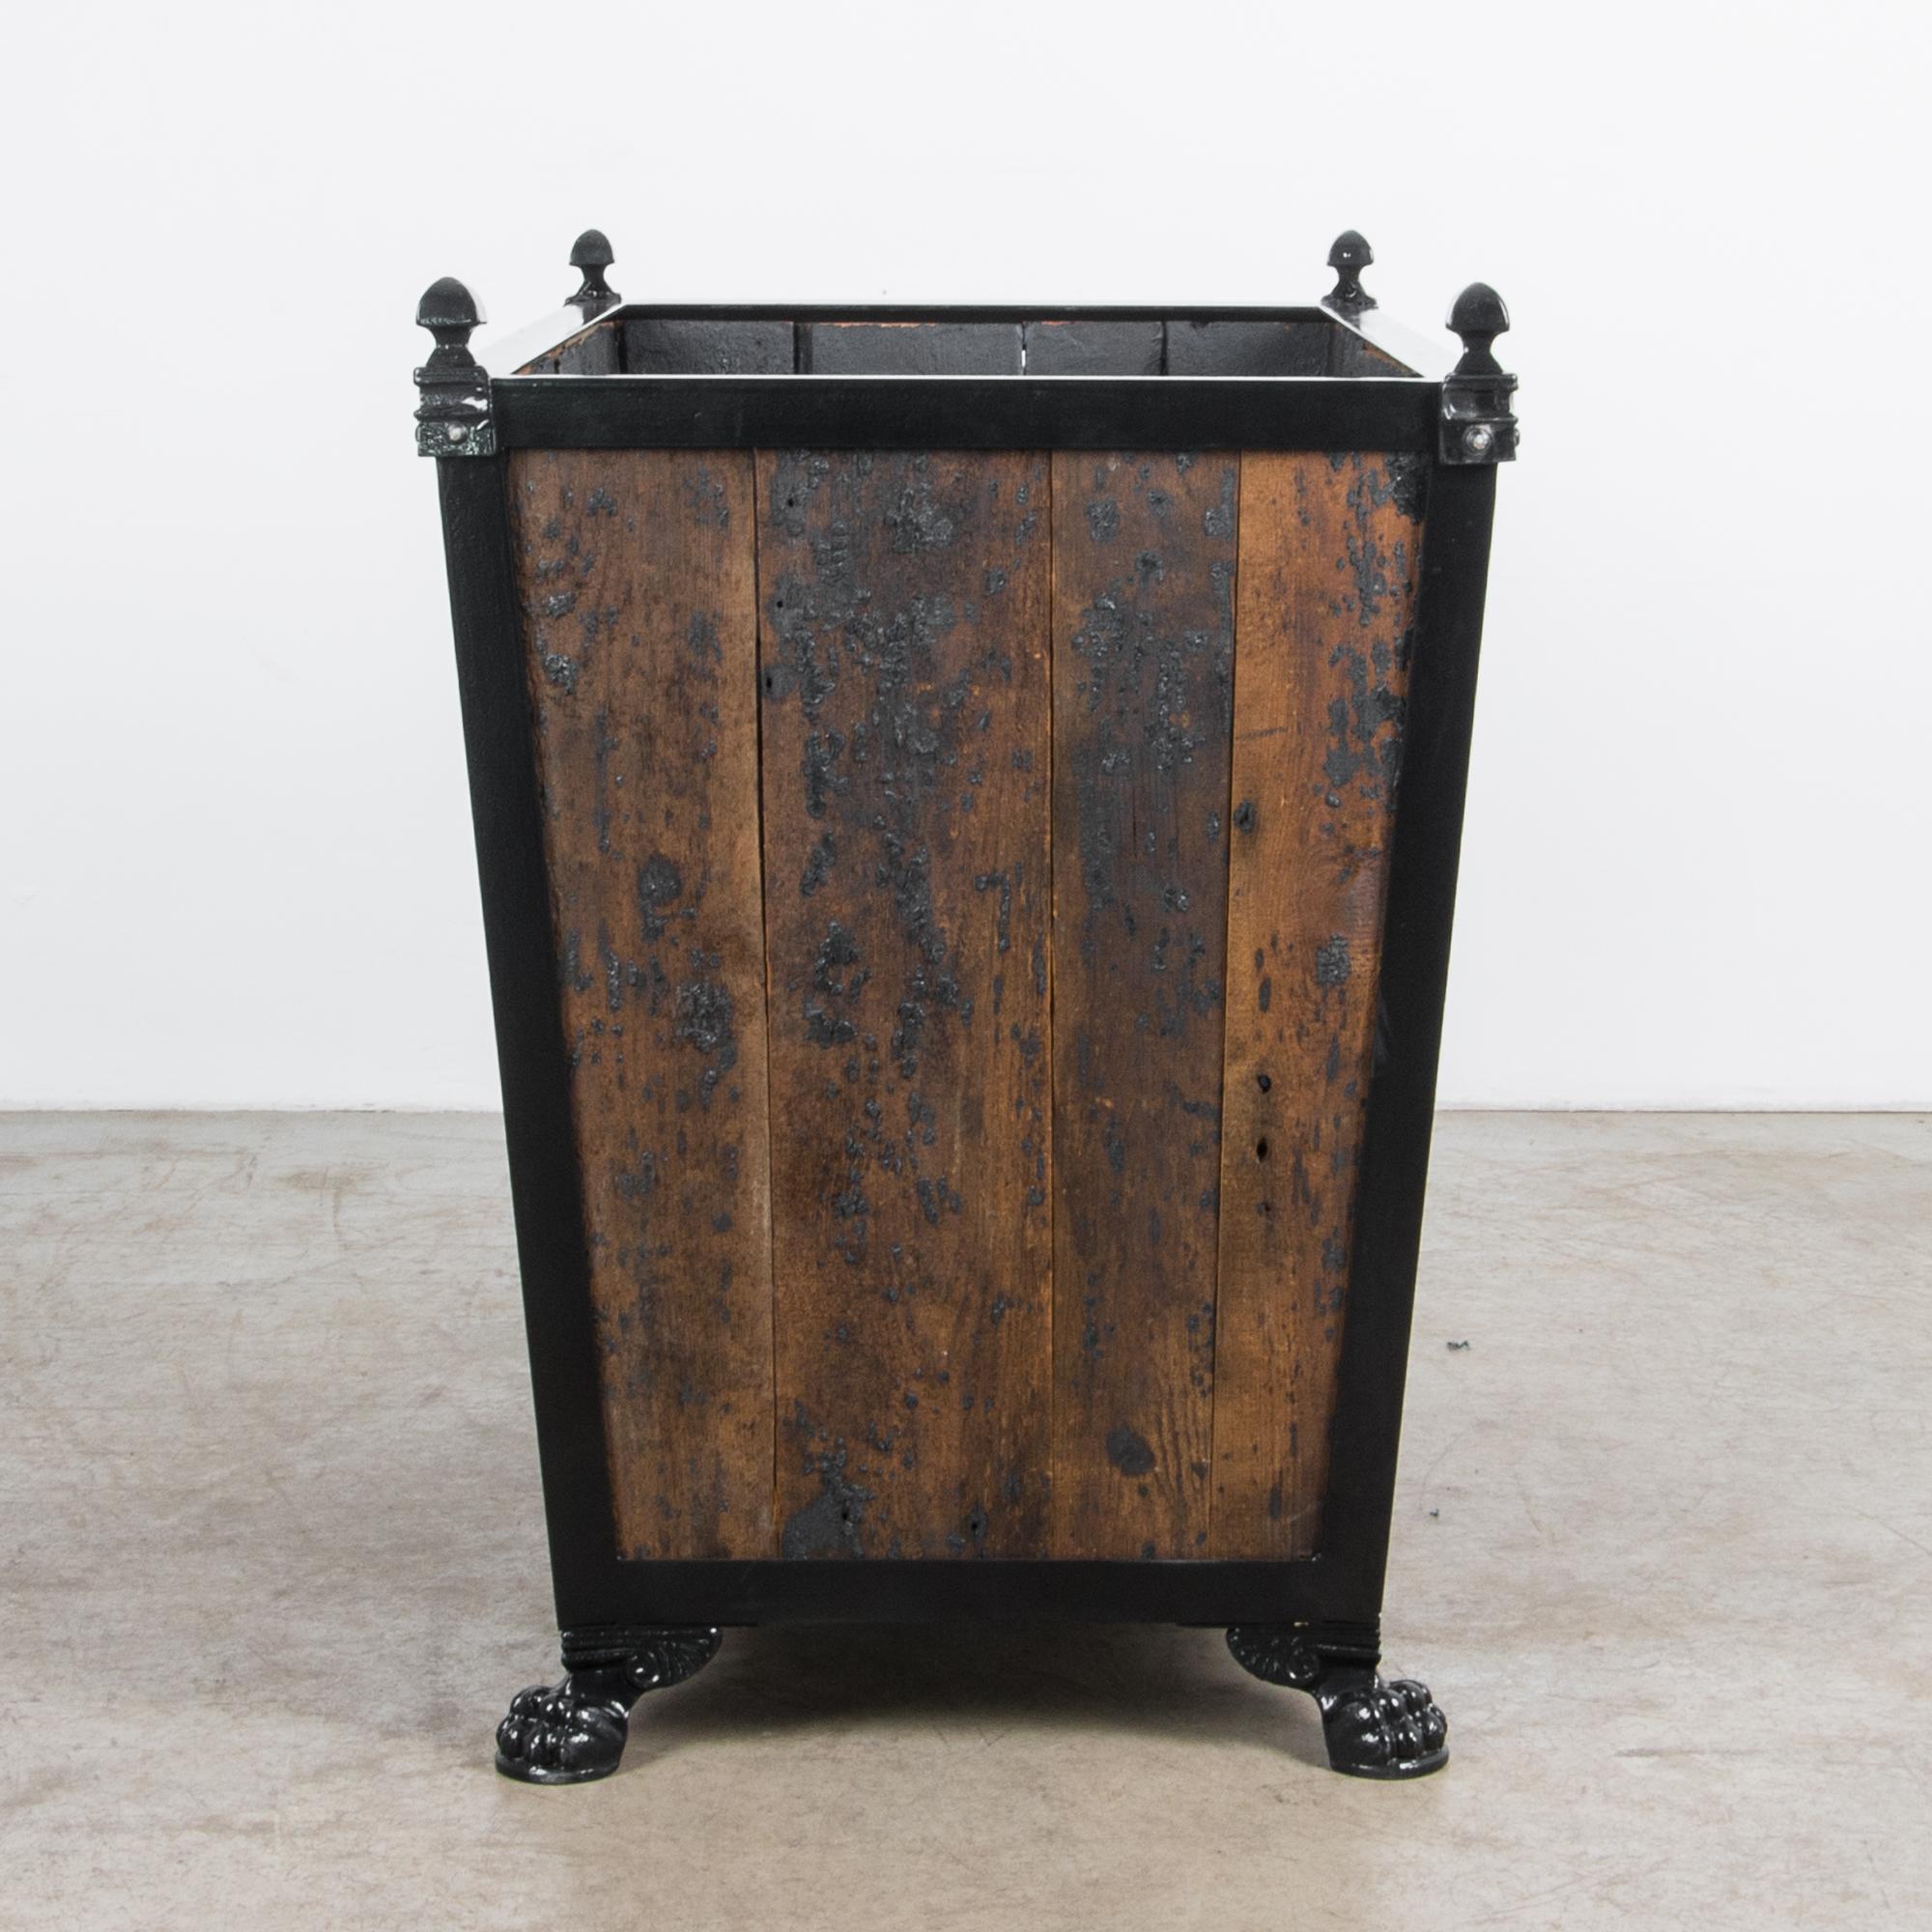 A sturdy wooden garden planter produced in our atelier. Finished with dramatic black tar, this wooden planter combines aged pine and sleek painted metal for an atmospheric dark textured look. The textured finish compliments a classic combination of